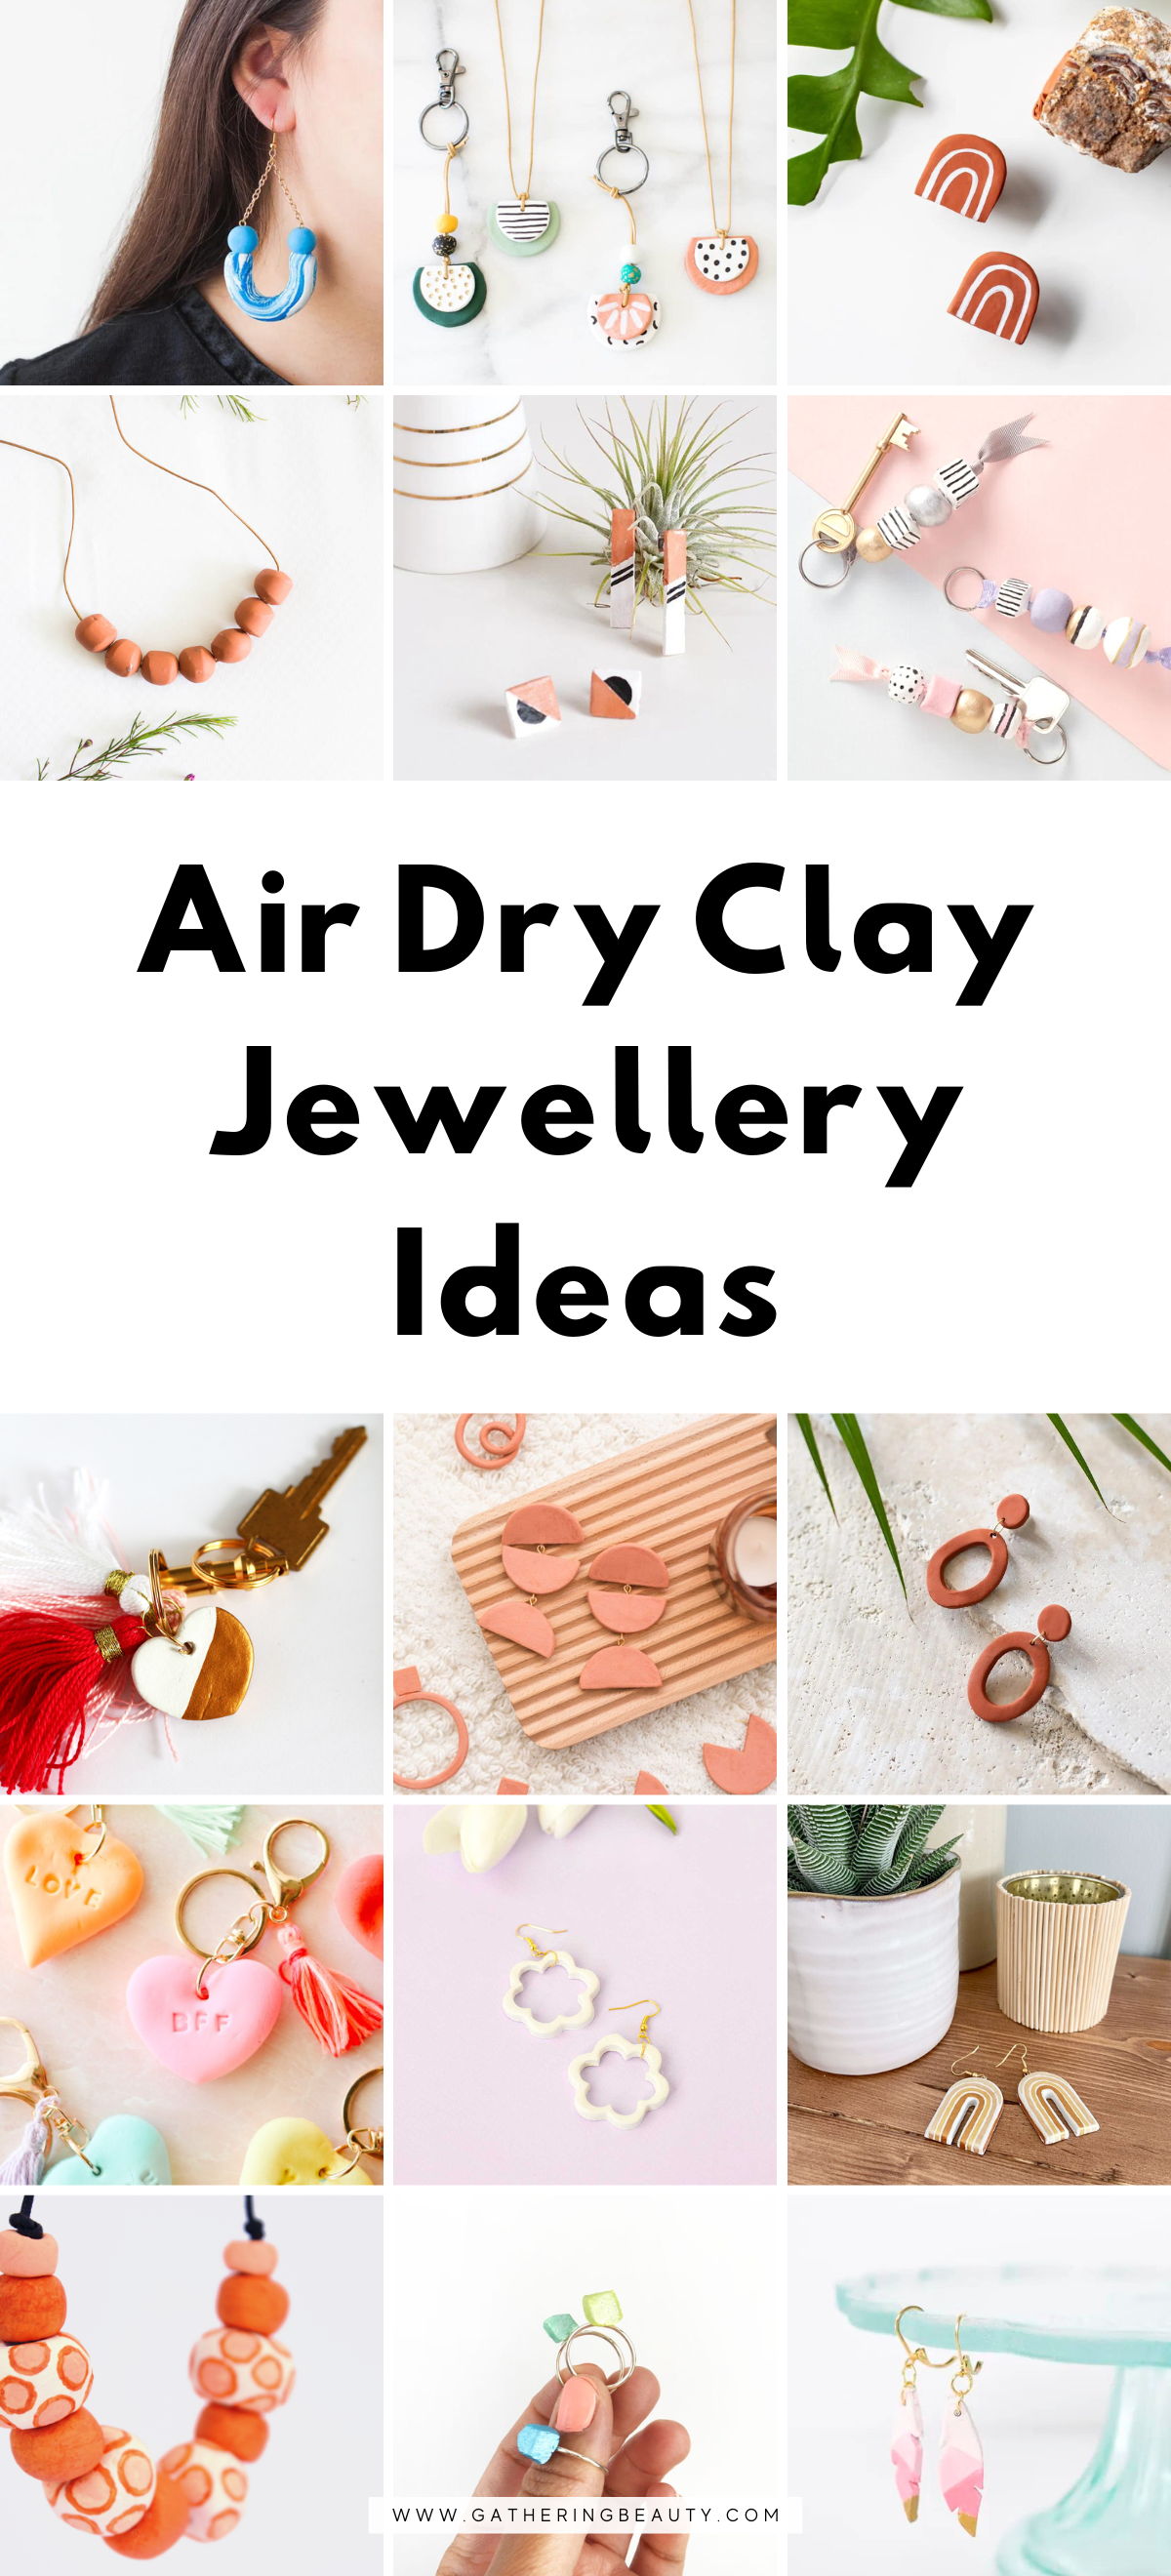 Creating Lovely Wearable Art Jewelry from Air Dry Paper Clay